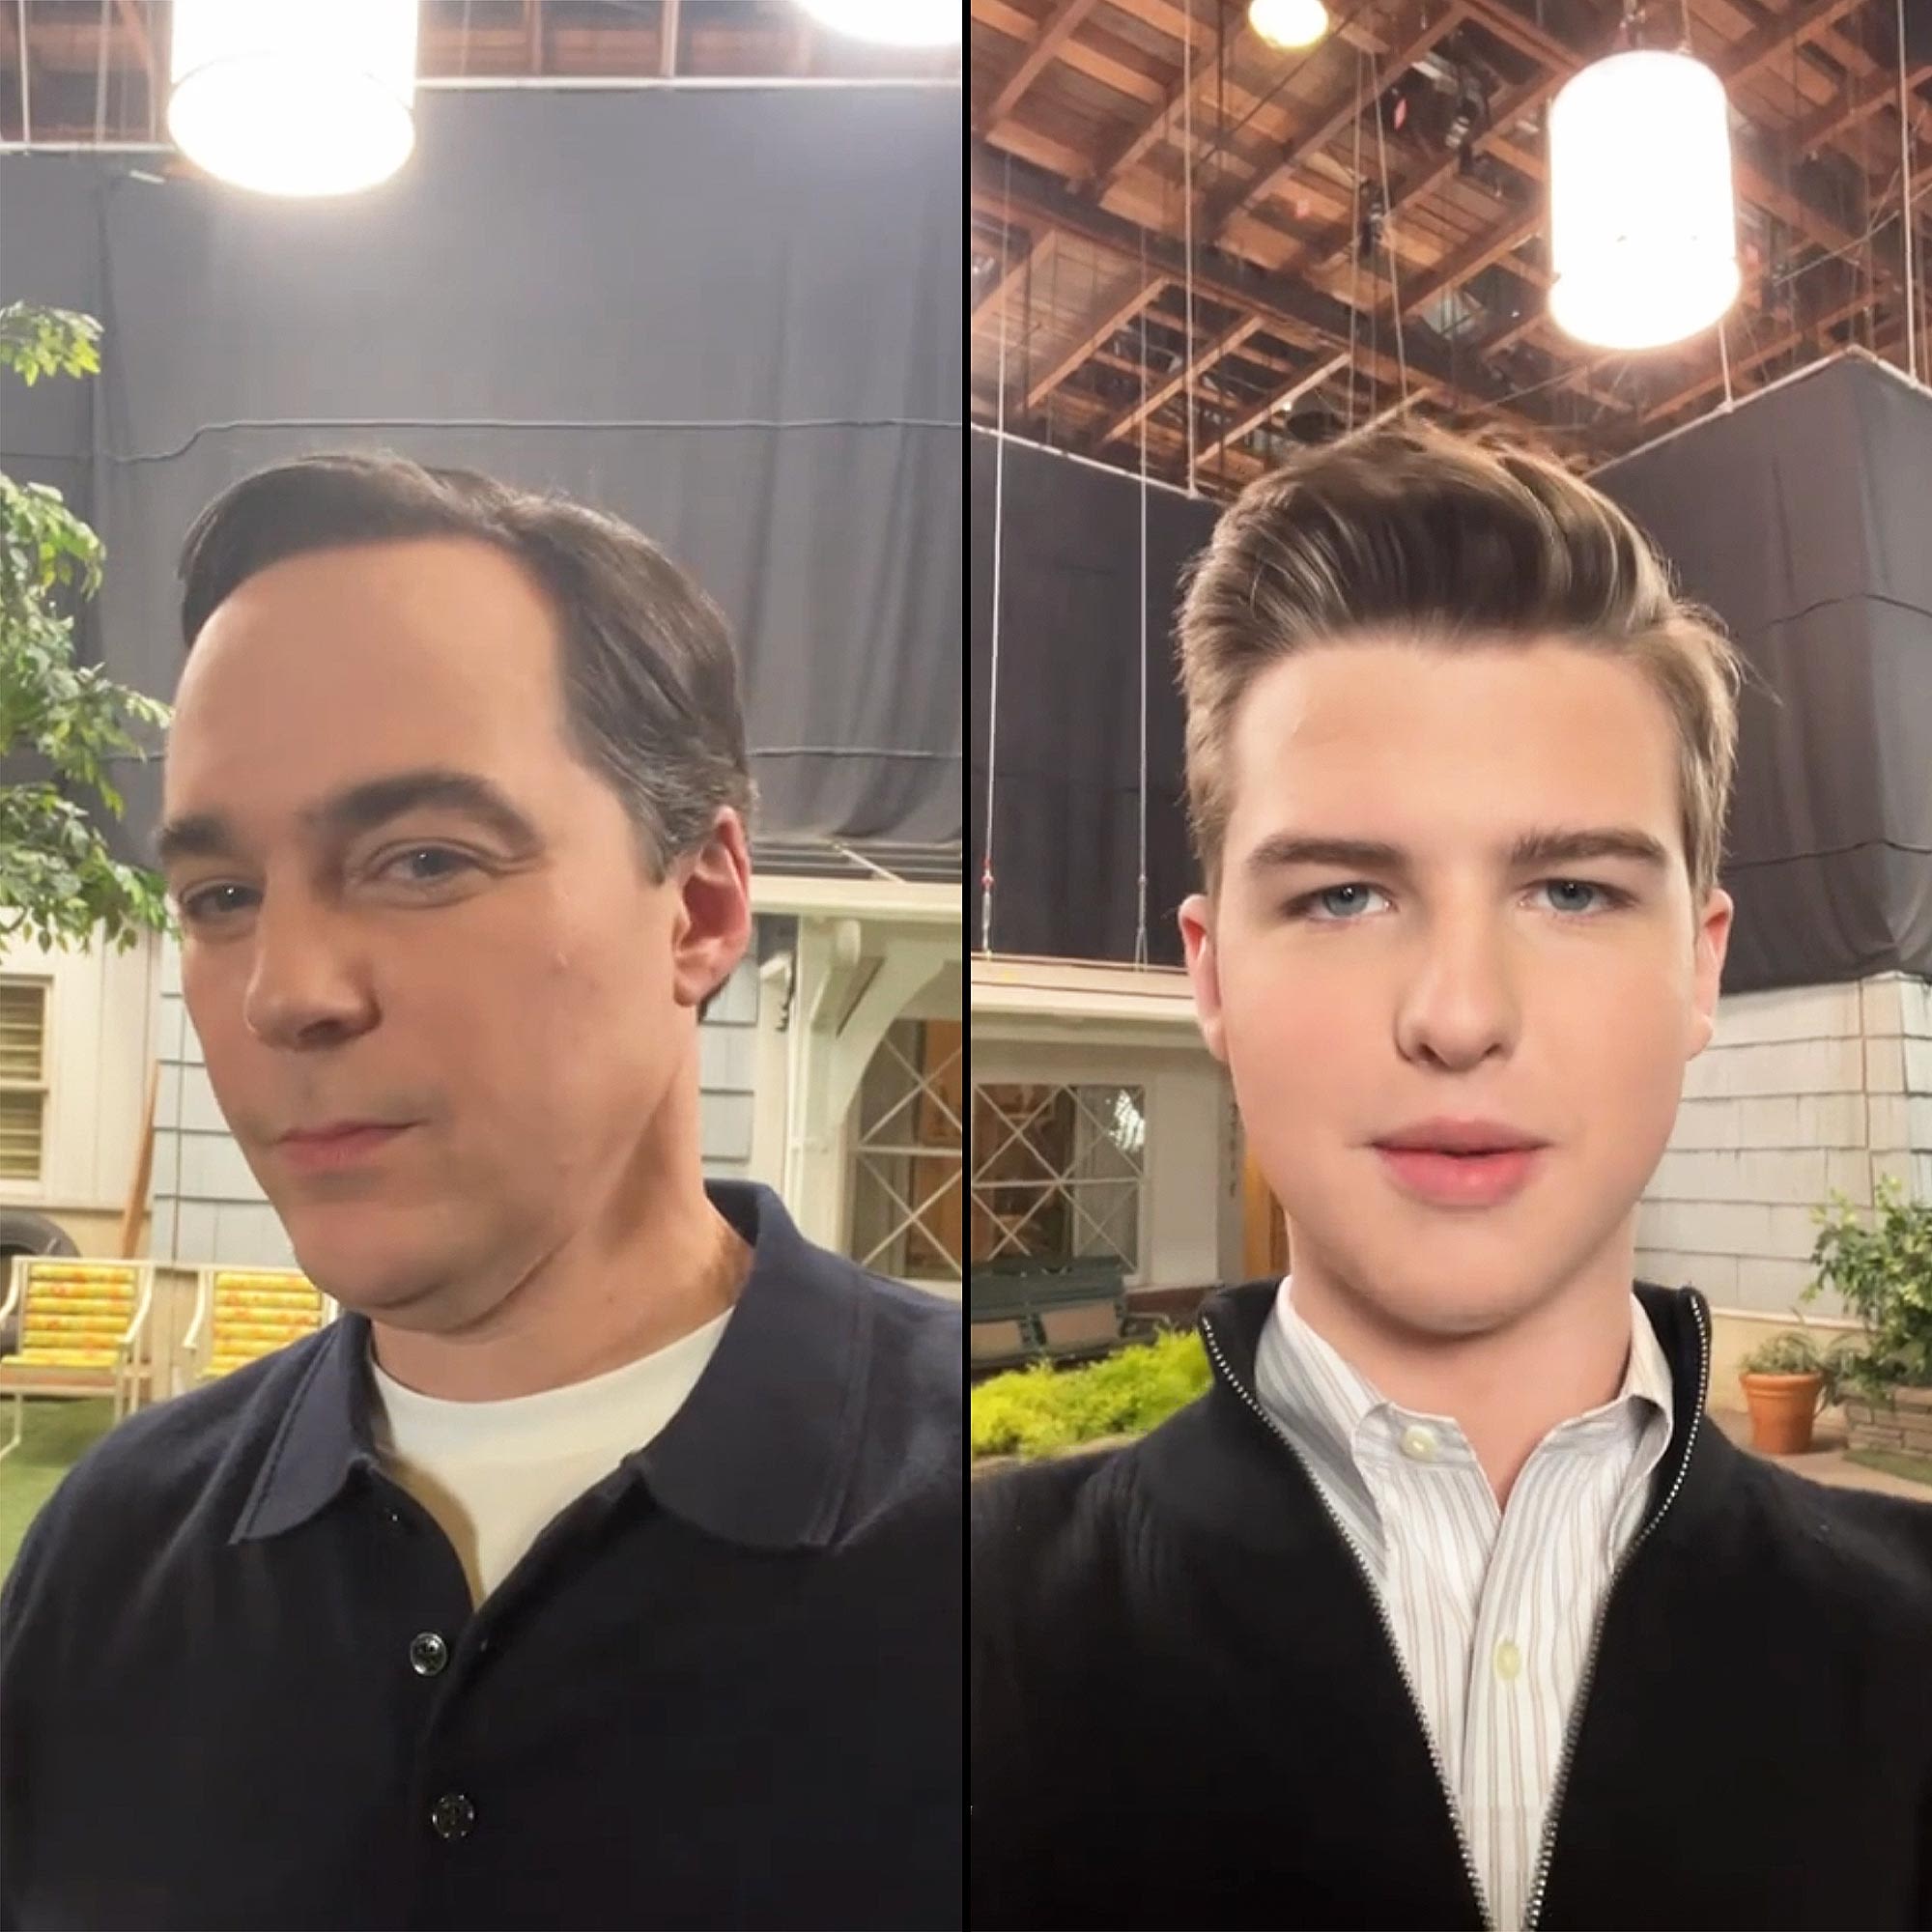 Jim Parsons Teases ‘Young Sheldon’ Finale Appearance in Sweet TikTok Video With Iain Armitage